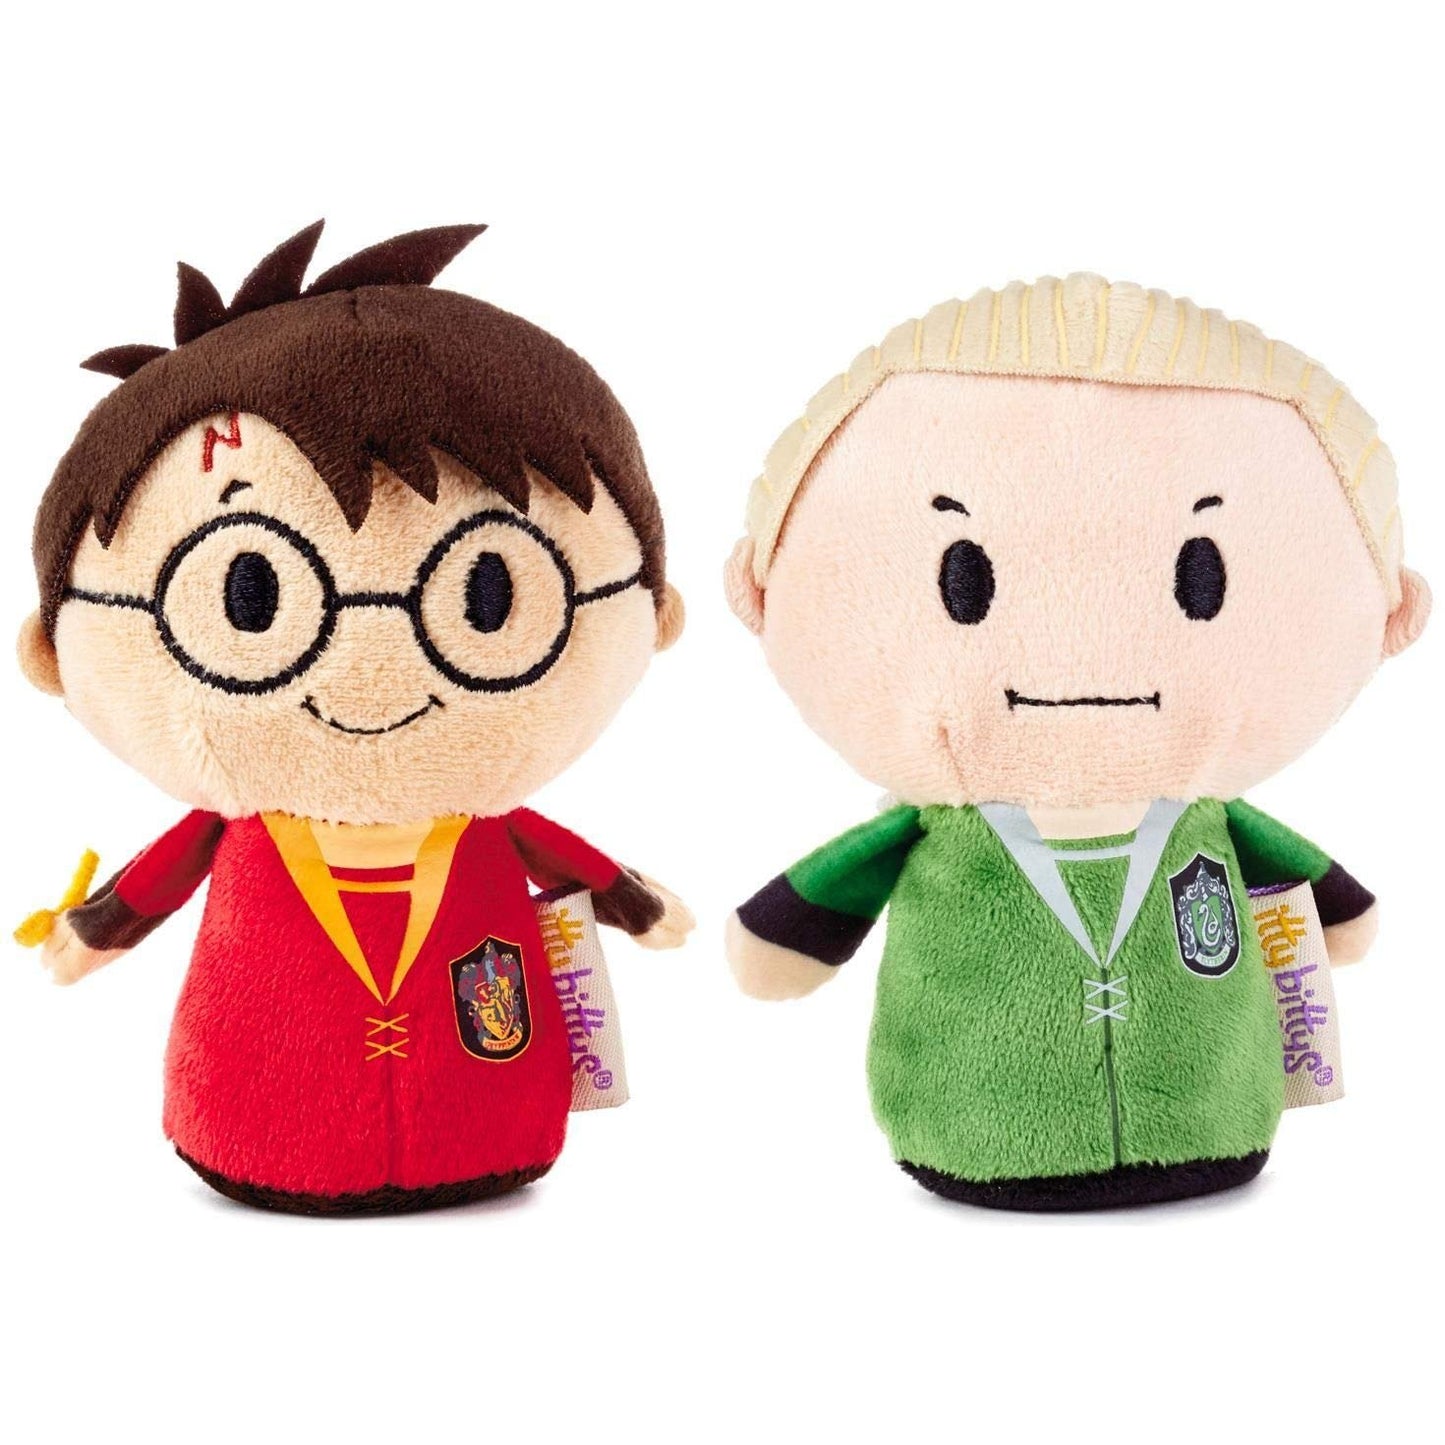 itty bittys Harry Potter Quidditch Pair Harry and Draco Stuffed Animals, Special Edition Set of 2 Stuffed Animals Movies & TV